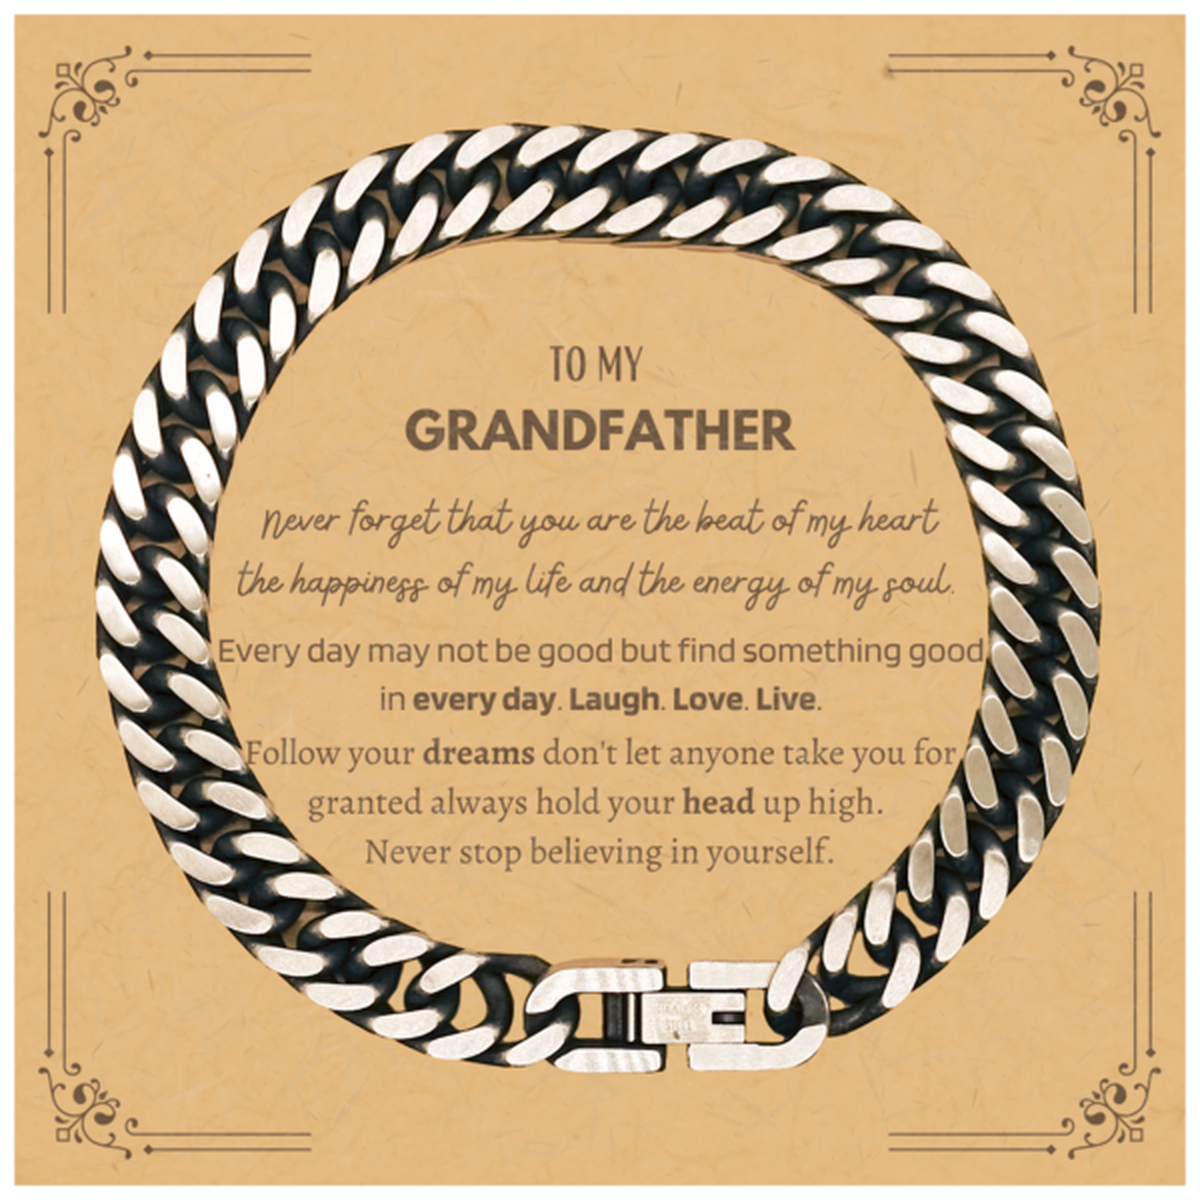 To My Grandfather Message Card Gifts, Christmas Grandfather Cuban Link Chain Bracelet Present, Birthday Unique Motivational For Grandfather, To My Grandfather Never forget that you are the beat of my heart the happiness of my life and the energy of my sou